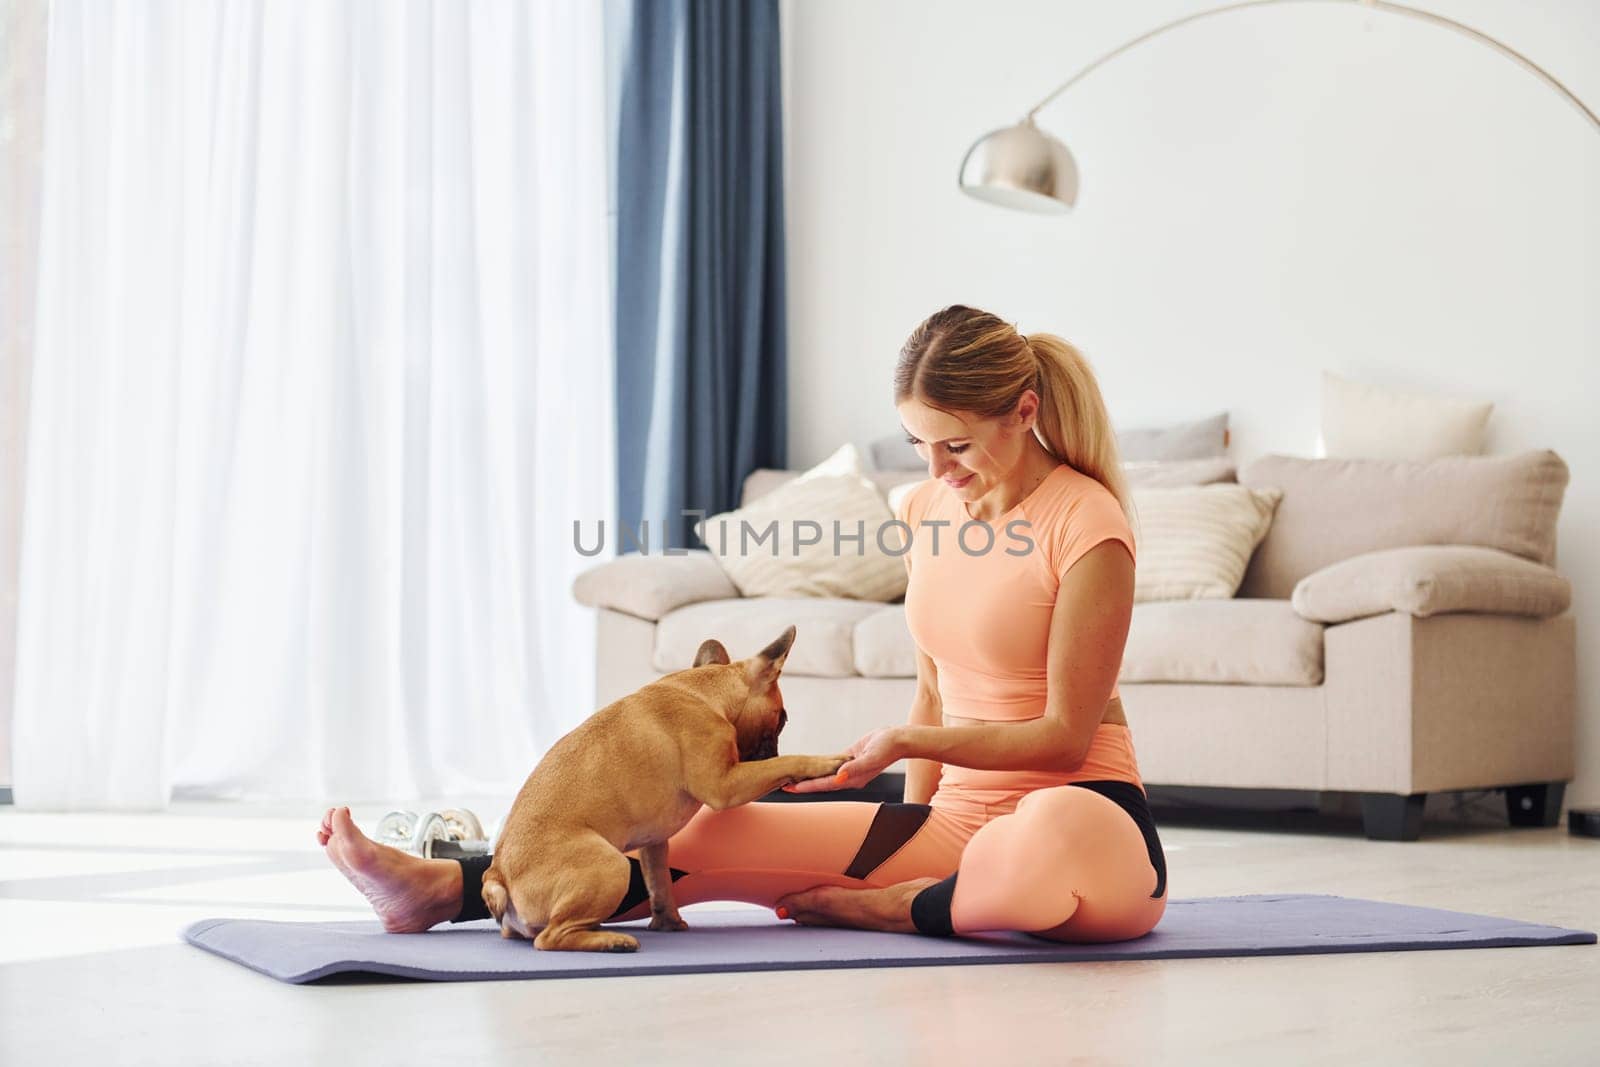 On fitness mat. Woman with pug dog is at home at daytime.